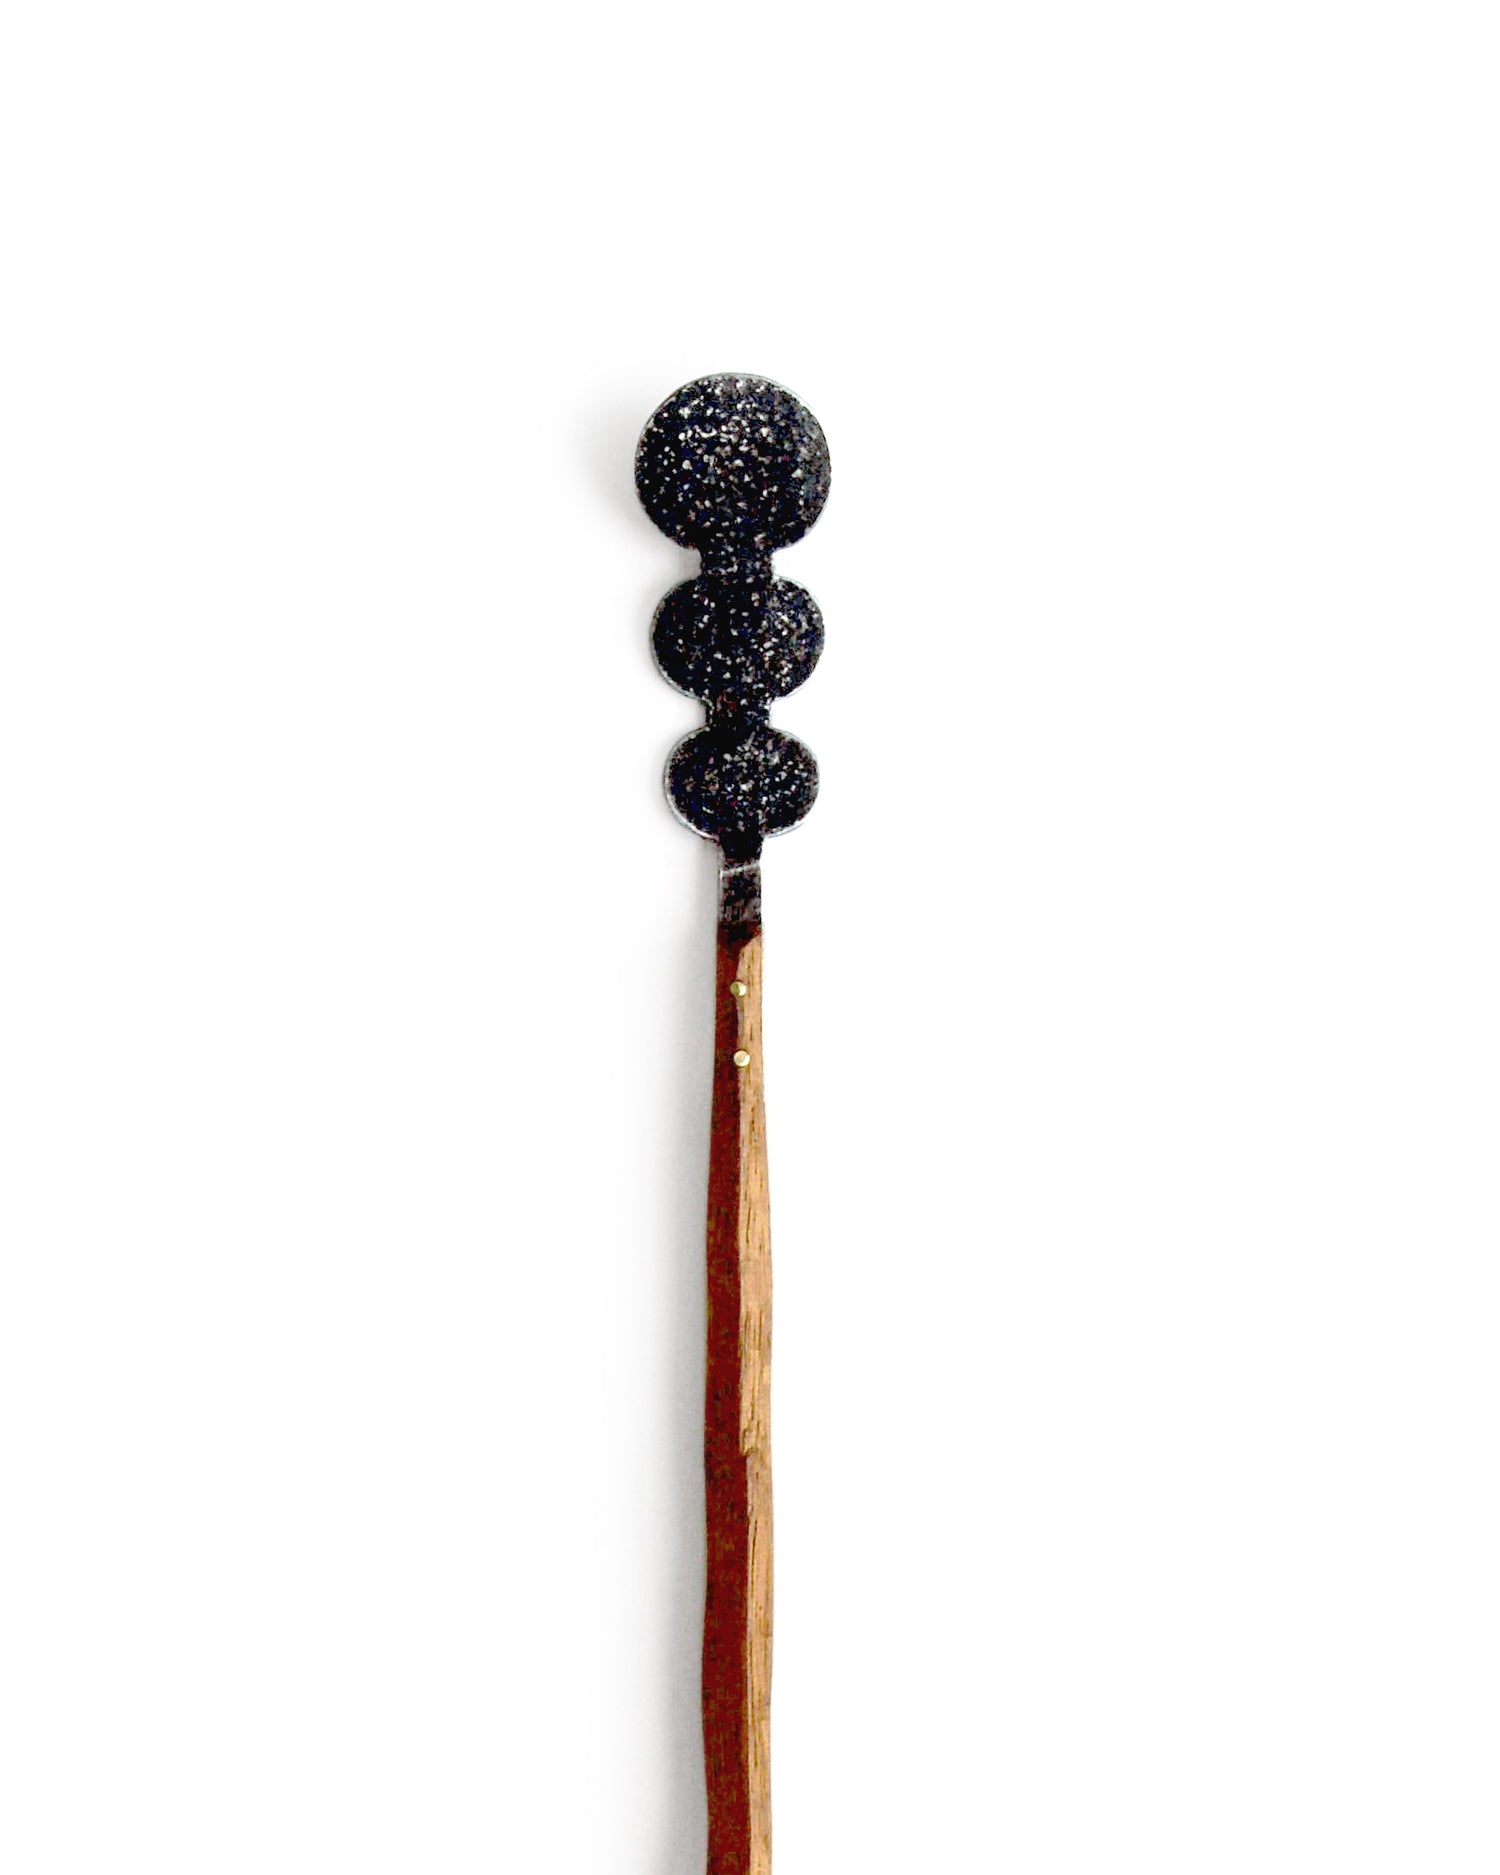 Mahogany Sprout Chashaku Tea Ladle - Bubble (OUT OF STOCK)